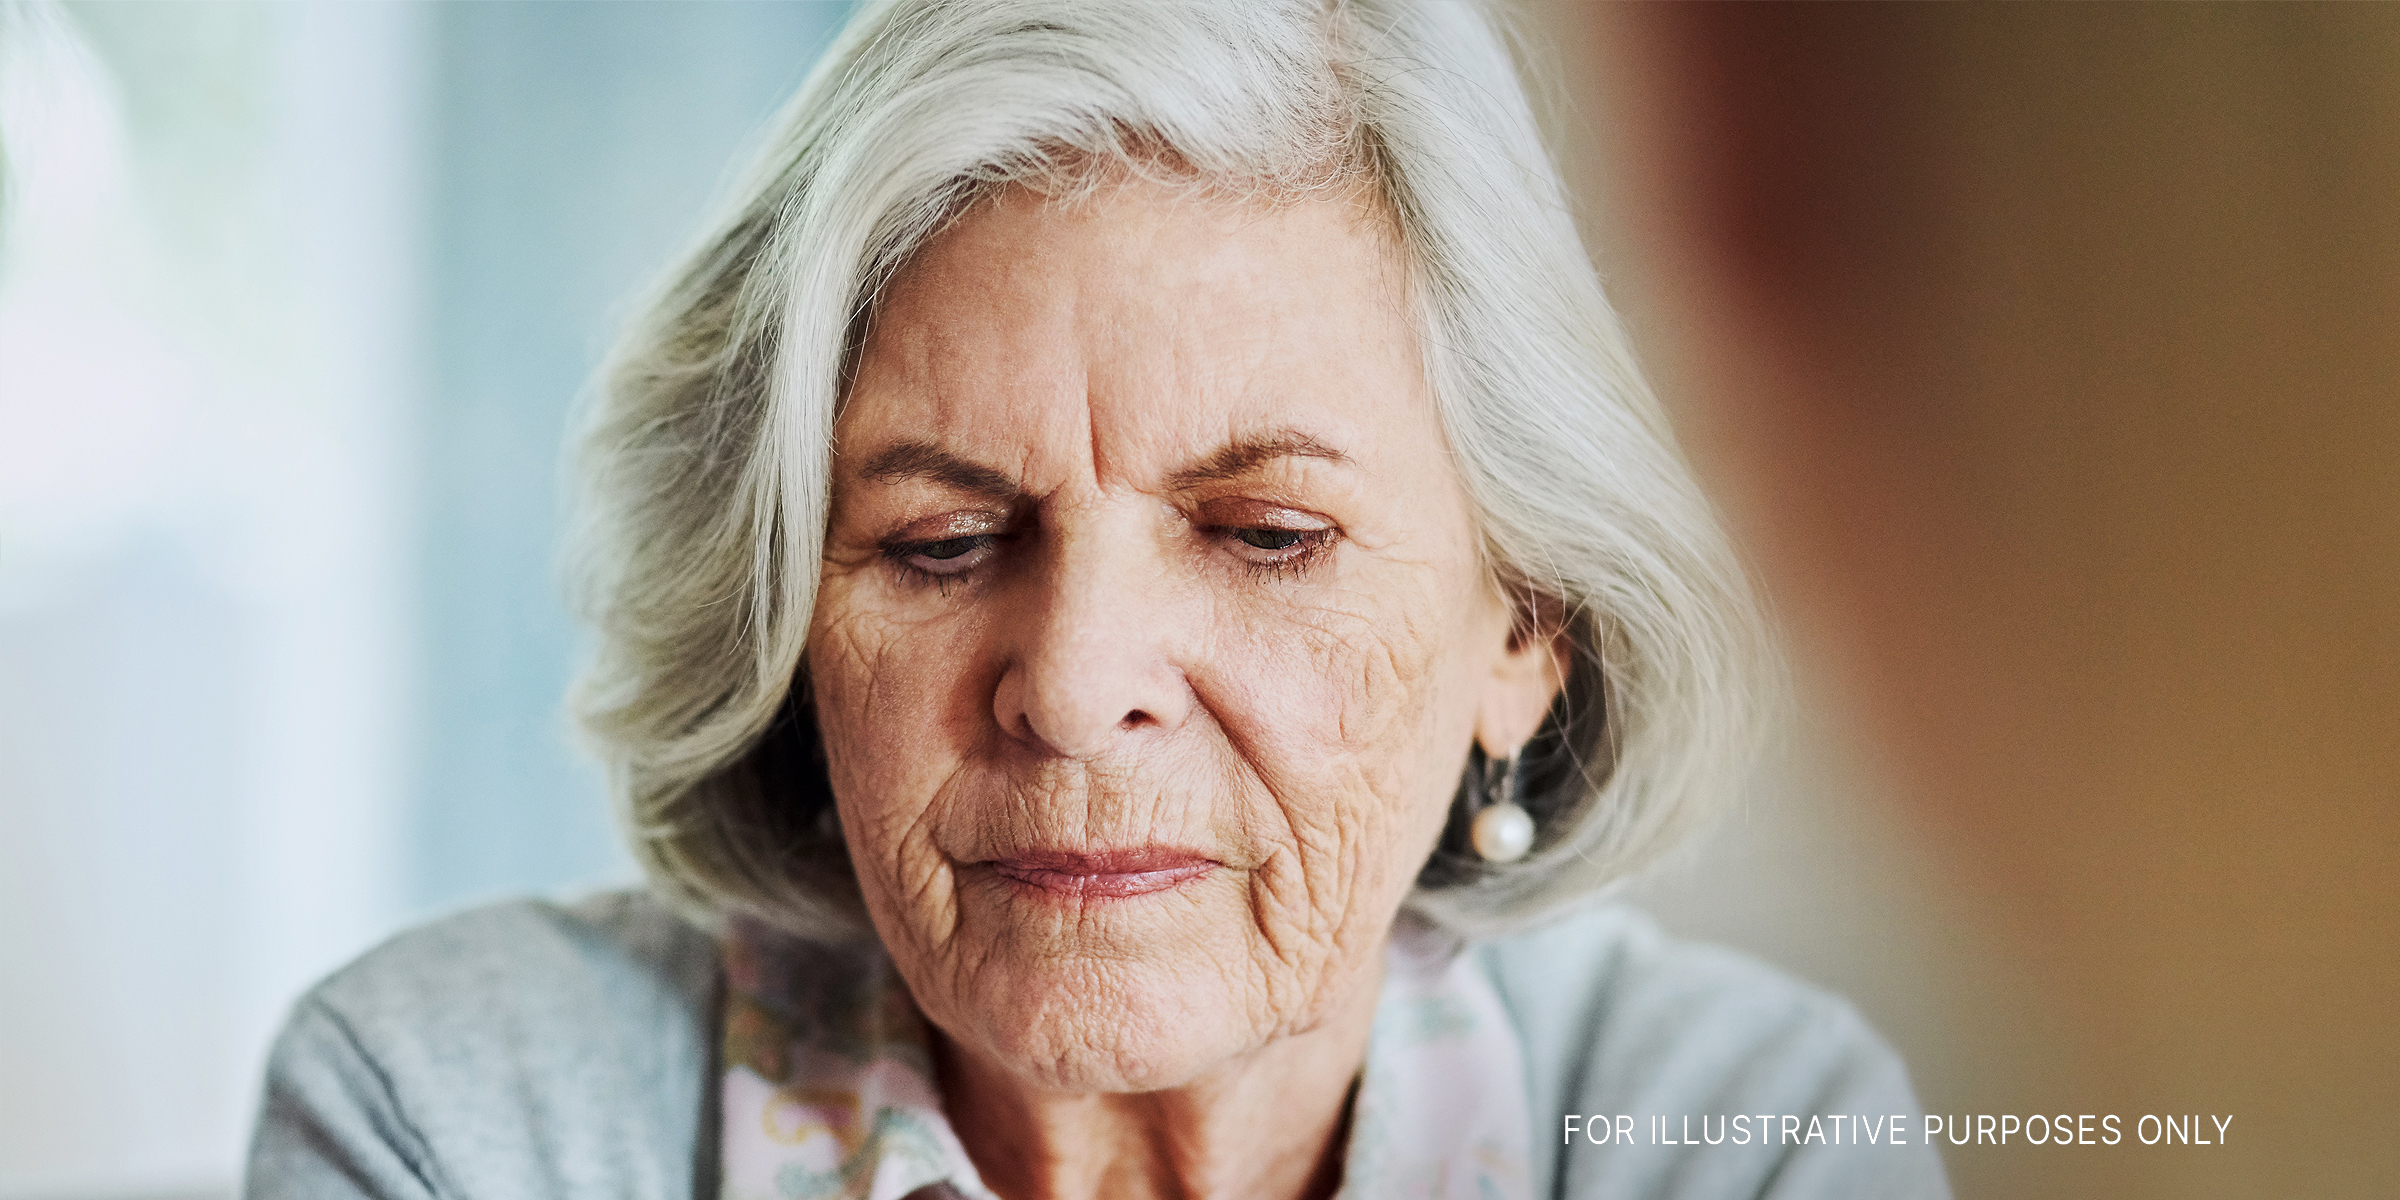 An upset older woman looking down | Source: Getty Images